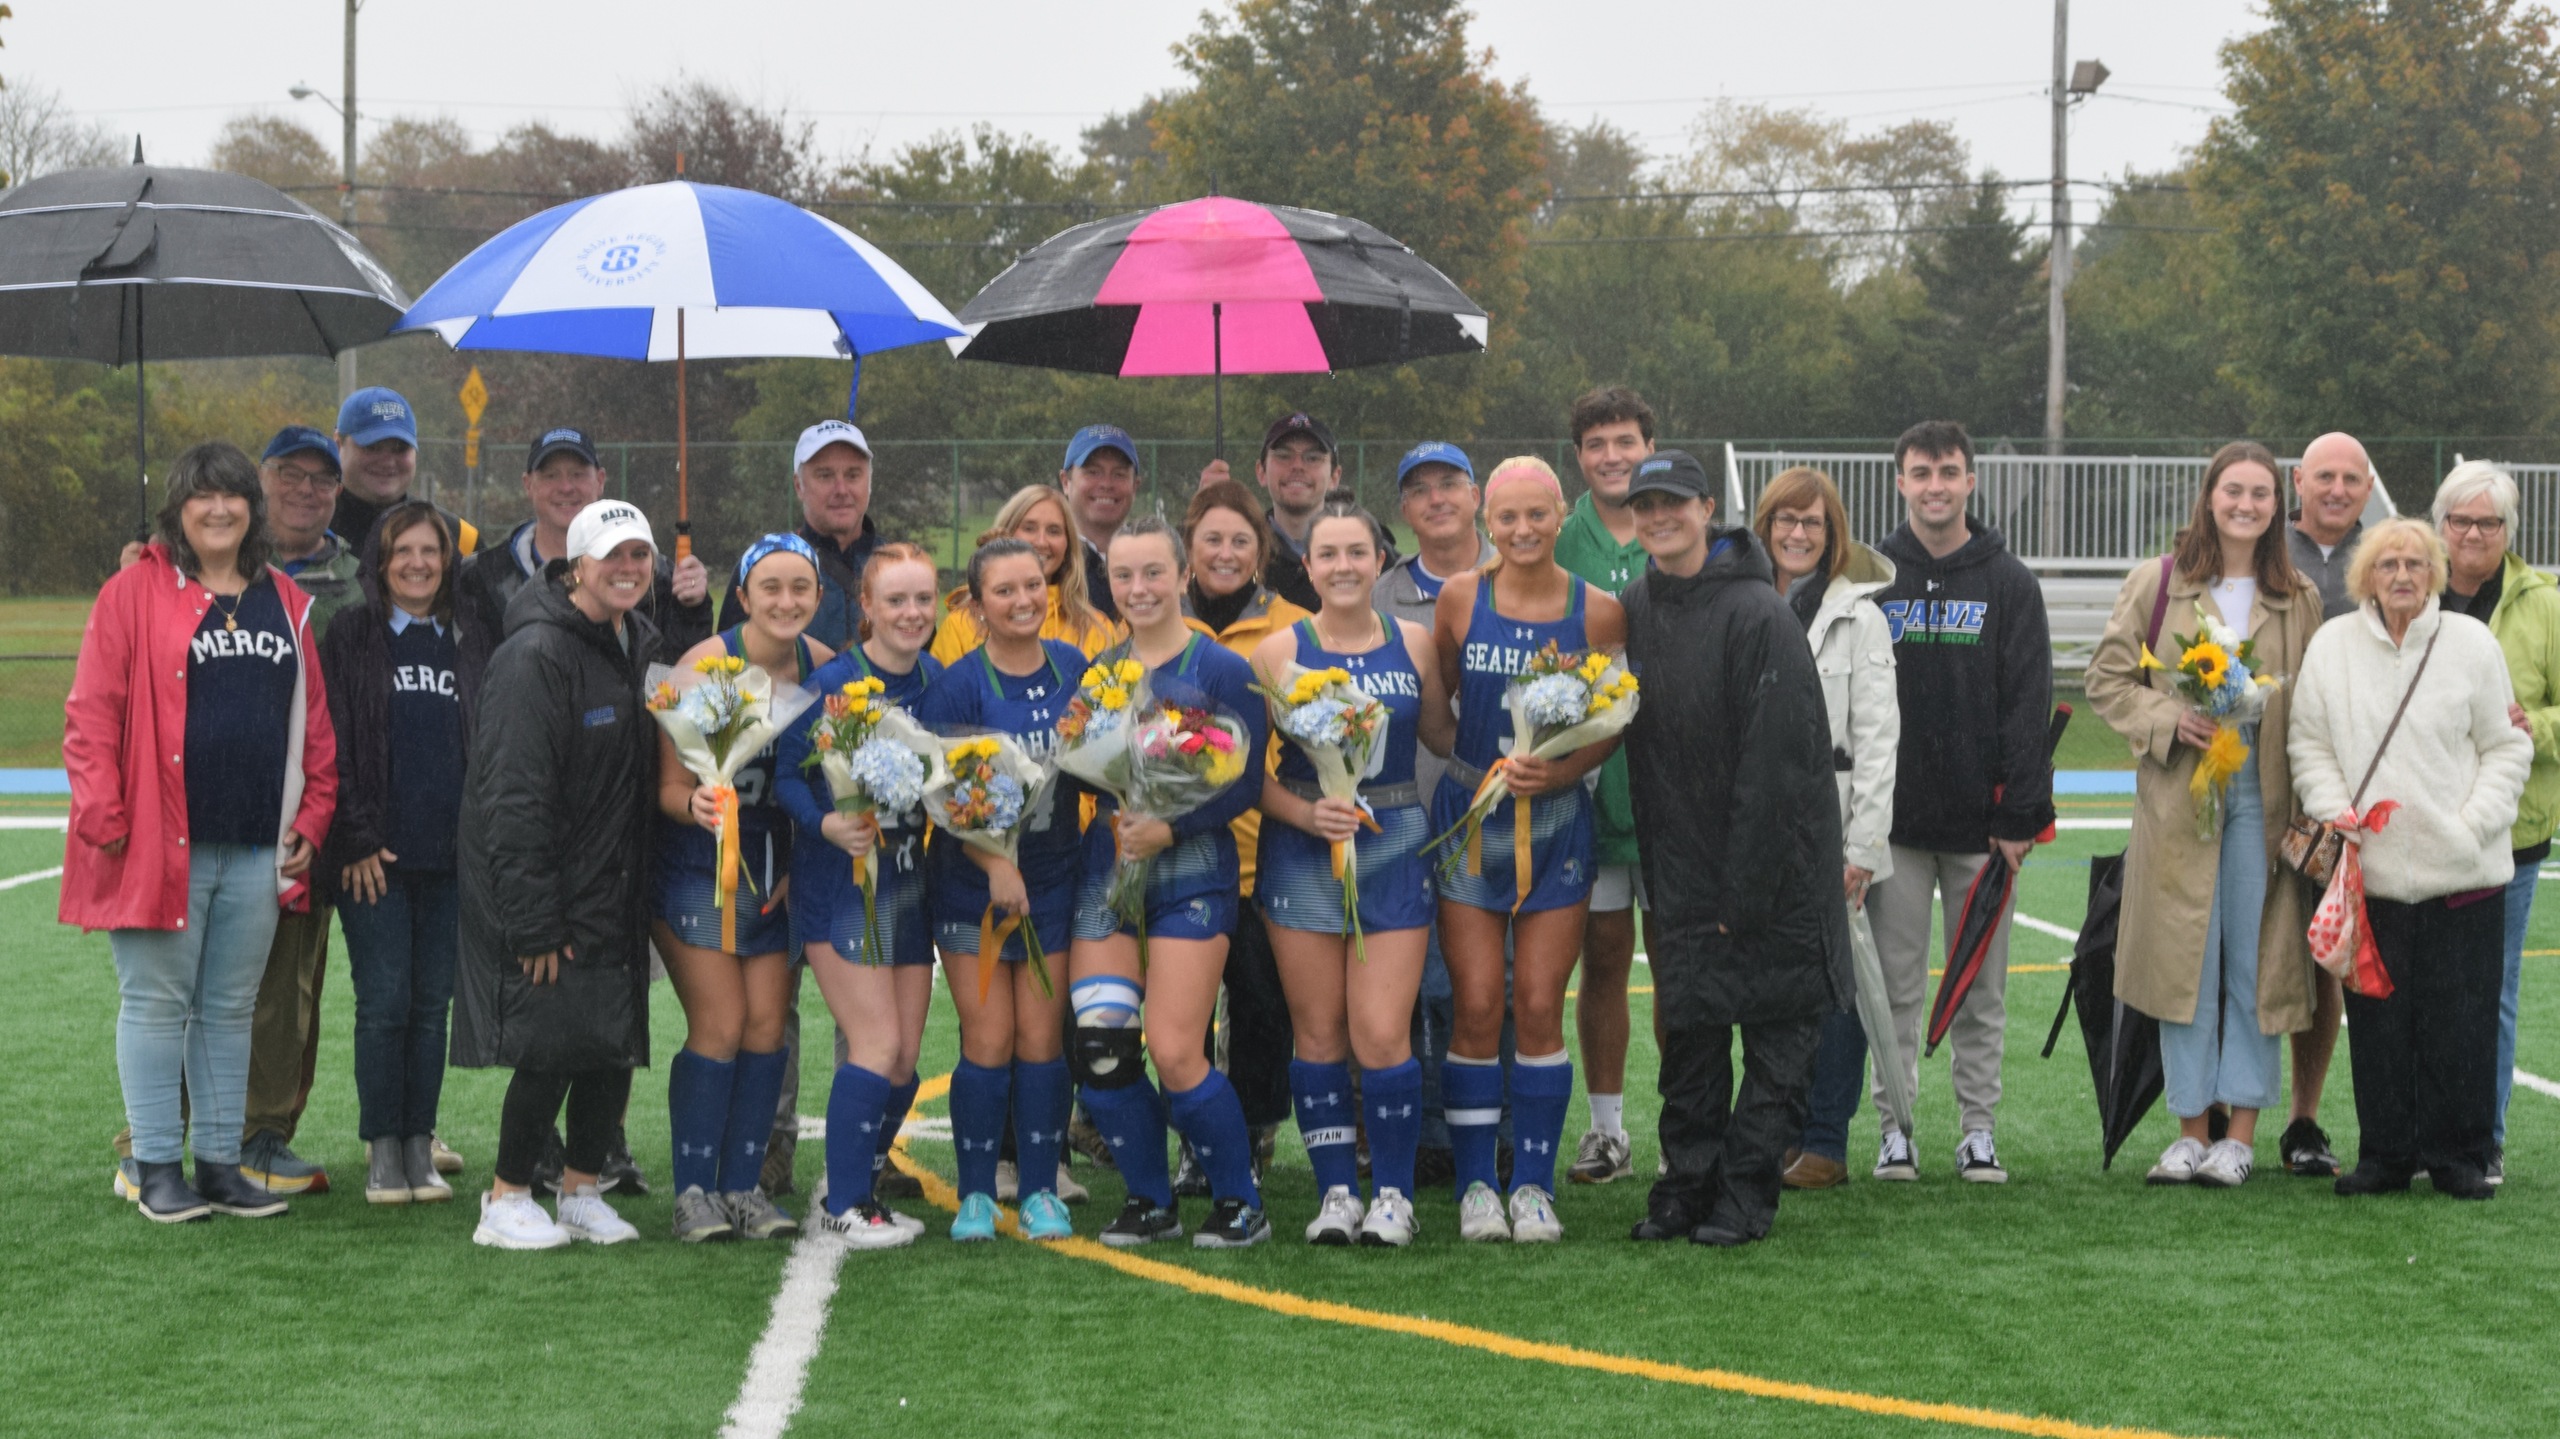 Class of 2024 - Elizabeth Clark, Lauren Foster, Lily Tordone, Maeve Ledwith, Ashley Lefebvre, Shannon Kennedy - Salve Regina field hockey seniors joined by their families and coaching staff during pre-game recognition.